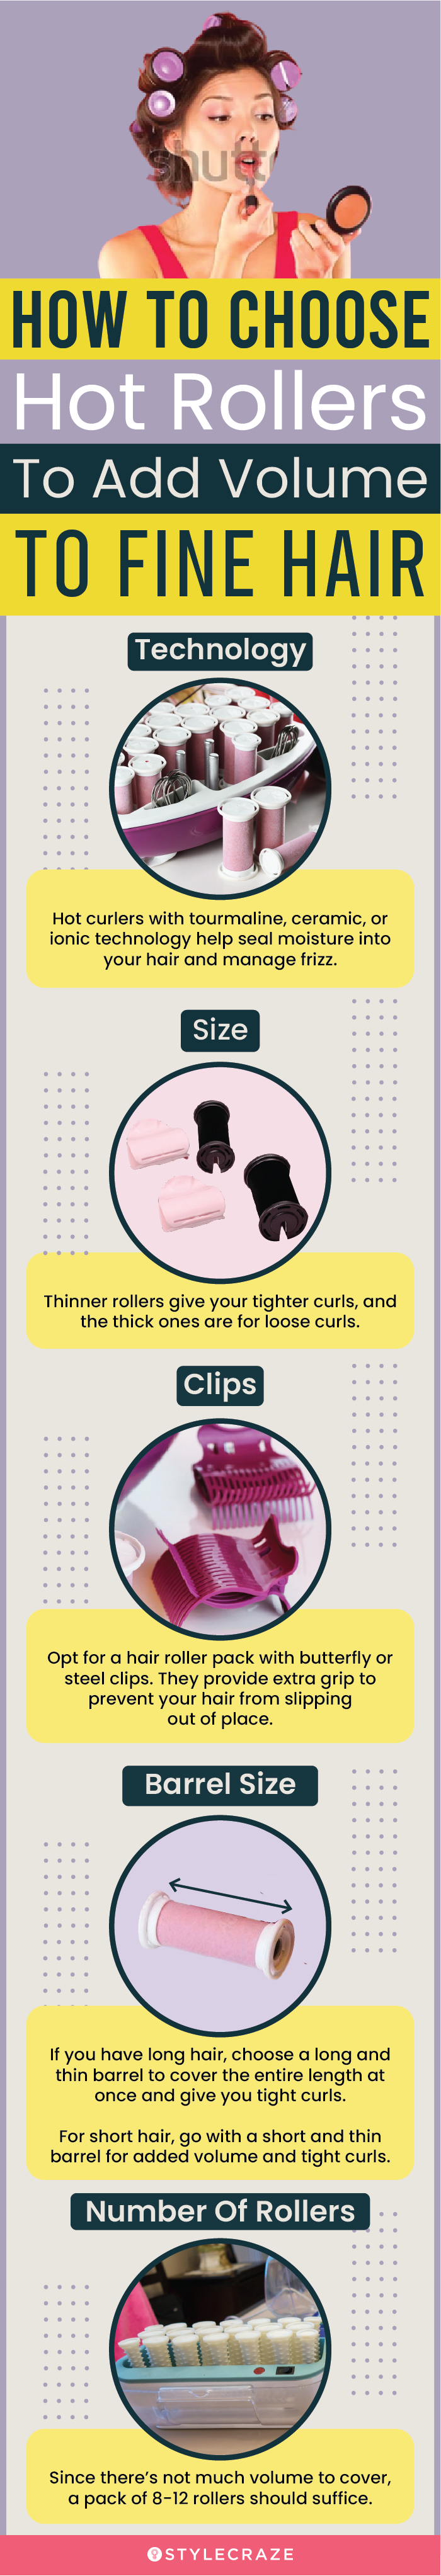 How To Choose Hot Rollers To Add Volume To Fine Hair